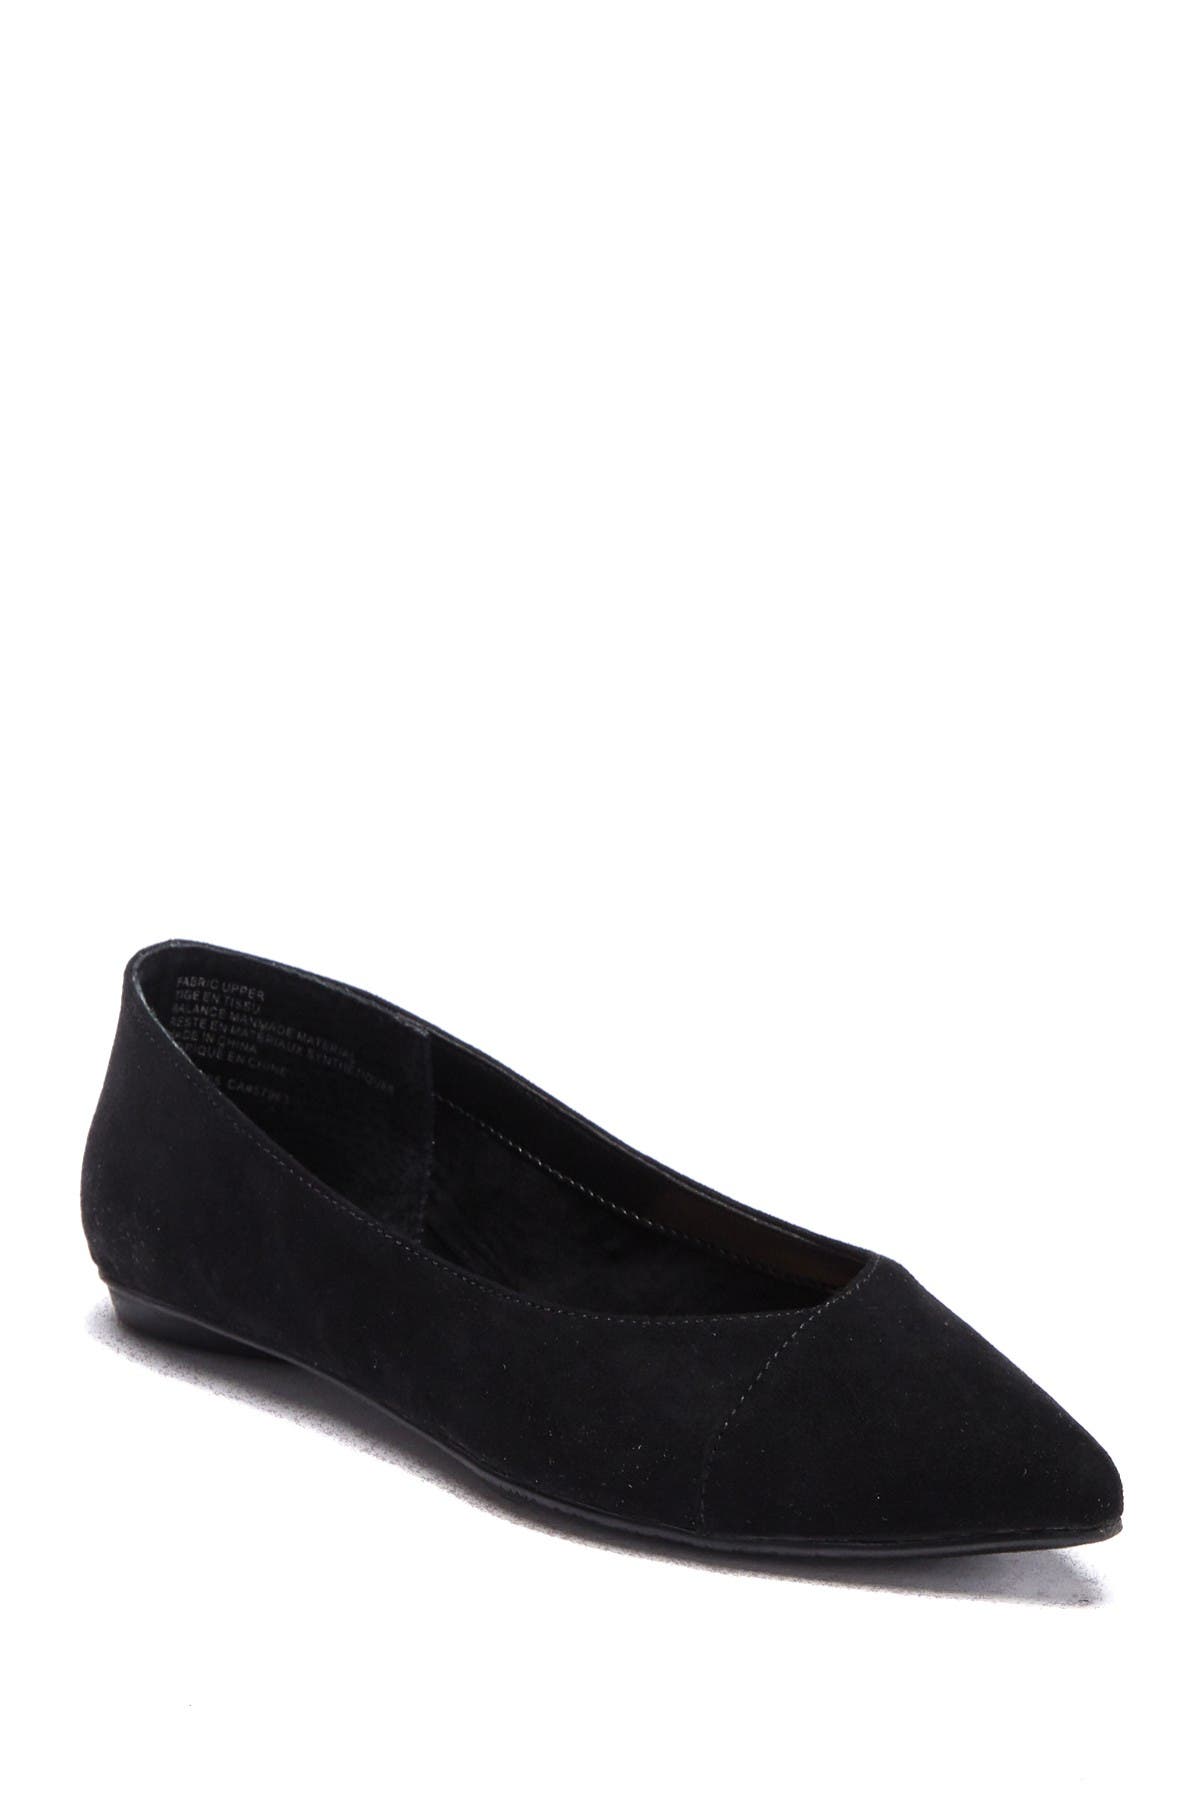 Abound | Sydnee Pointed Toe Flat | Nordstrom Rack